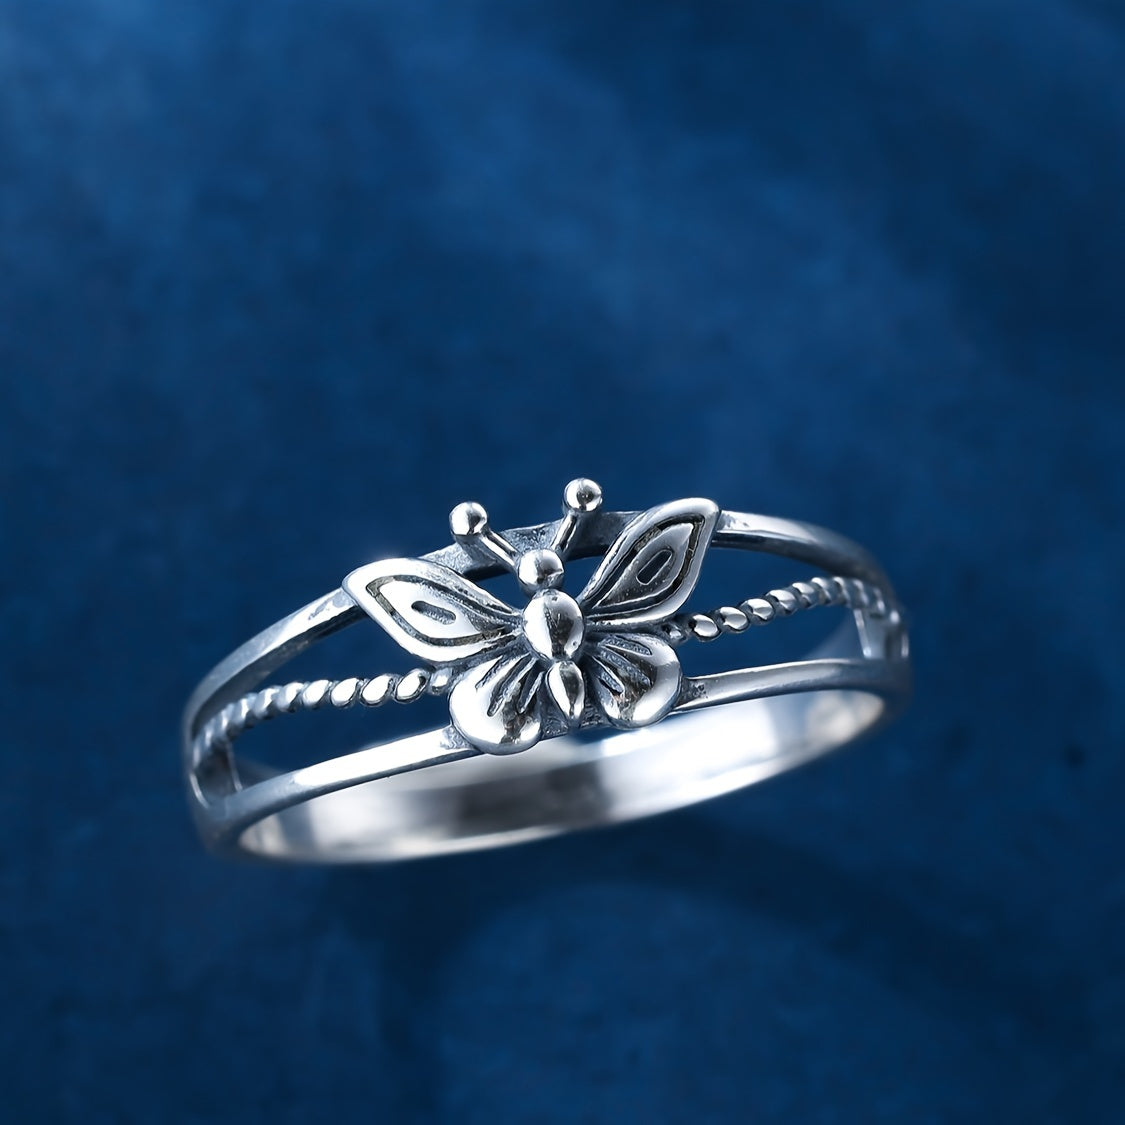 925 Sterling Silver Ring Retro Butterfly Design High Quality Jewelry Match Daily Outfits Party Accessory Gift For Your Cool & Sweet Lover